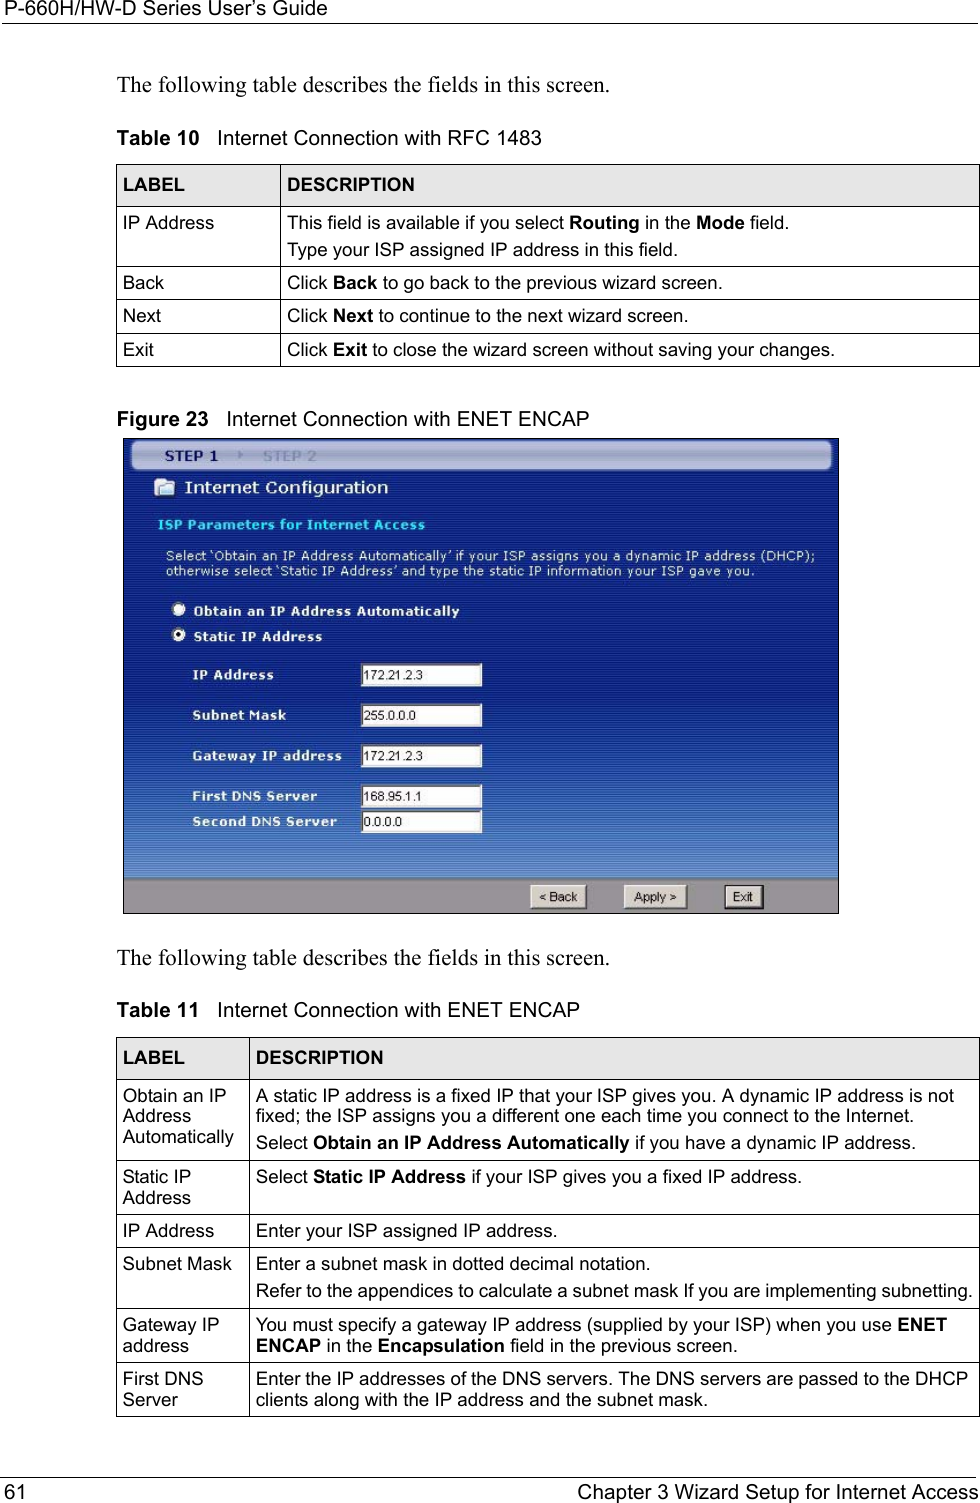 P-660H/HW-D Series User’s Guide61 Chapter 3 Wizard Setup for Internet AccessThe following table describes the fields in this screen.Figure 23   Internet Connection with ENET ENCAPThe following table describes the fields in this screen.Table 10   Internet Connection with RFC 1483LABEL DESCRIPTIONIP Address This field is available if you select Routing in the Mode field.Type your ISP assigned IP address in this field. Back Click Back to go back to the previous wizard screen.Next Click Next to continue to the next wizard screen.Exit Click Exit to close the wizard screen without saving your changes.Table 11   Internet Connection with ENET ENCAPLABEL DESCRIPTIONObtain an IP Address AutomaticallyA static IP address is a fixed IP that your ISP gives you. A dynamic IP address is not fixed; the ISP assigns you a different one each time you connect to the Internet.Select Obtain an IP Address Automatically if you have a dynamic IP address.Static IP AddressSelect Static IP Address if your ISP gives you a fixed IP address.IP Address Enter your ISP assigned IP address.Subnet Mask Enter a subnet mask in dotted decimal notation. Refer to the appendices to calculate a subnet mask If you are implementing subnetting.Gateway IP addressYou must specify a gateway IP address (supplied by your ISP) when you use ENET ENCAP in the Encapsulation field in the previous screen.First DNS ServerEnter the IP addresses of the DNS servers. The DNS servers are passed to the DHCP clients along with the IP address and the subnet mask.